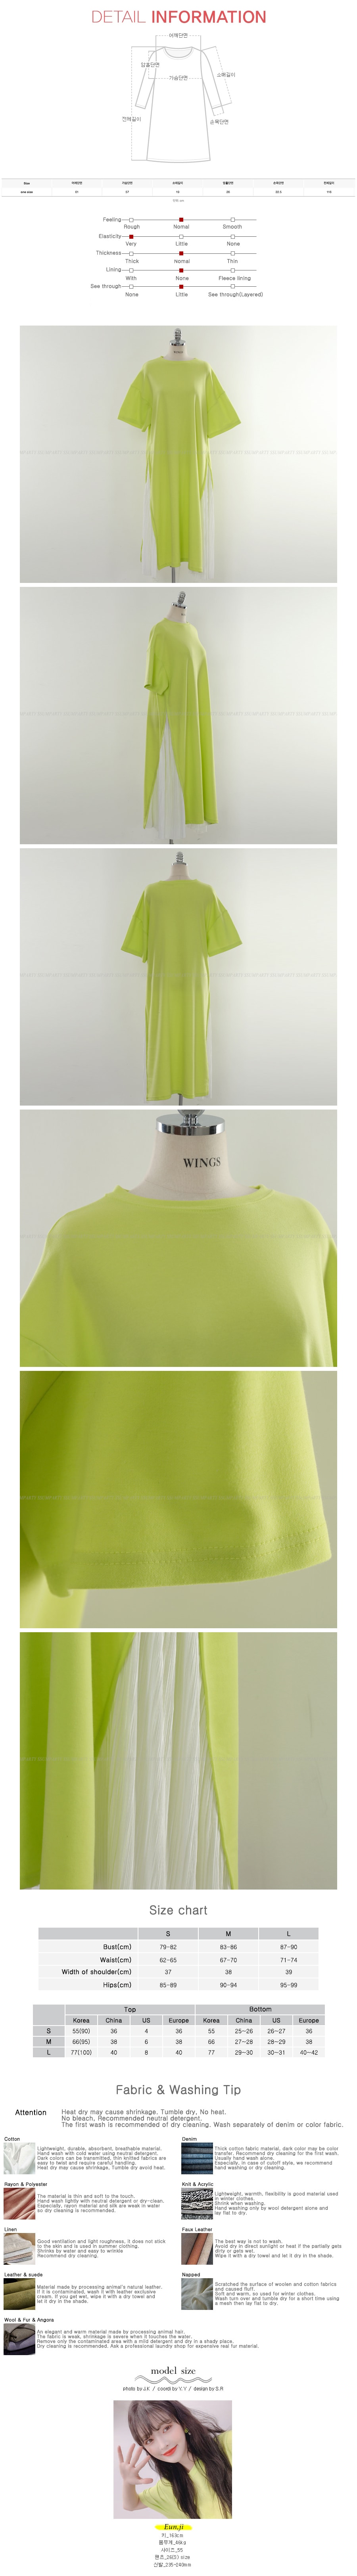 Patchwork Pleated Dress #Yellowish Green One Size(Free)